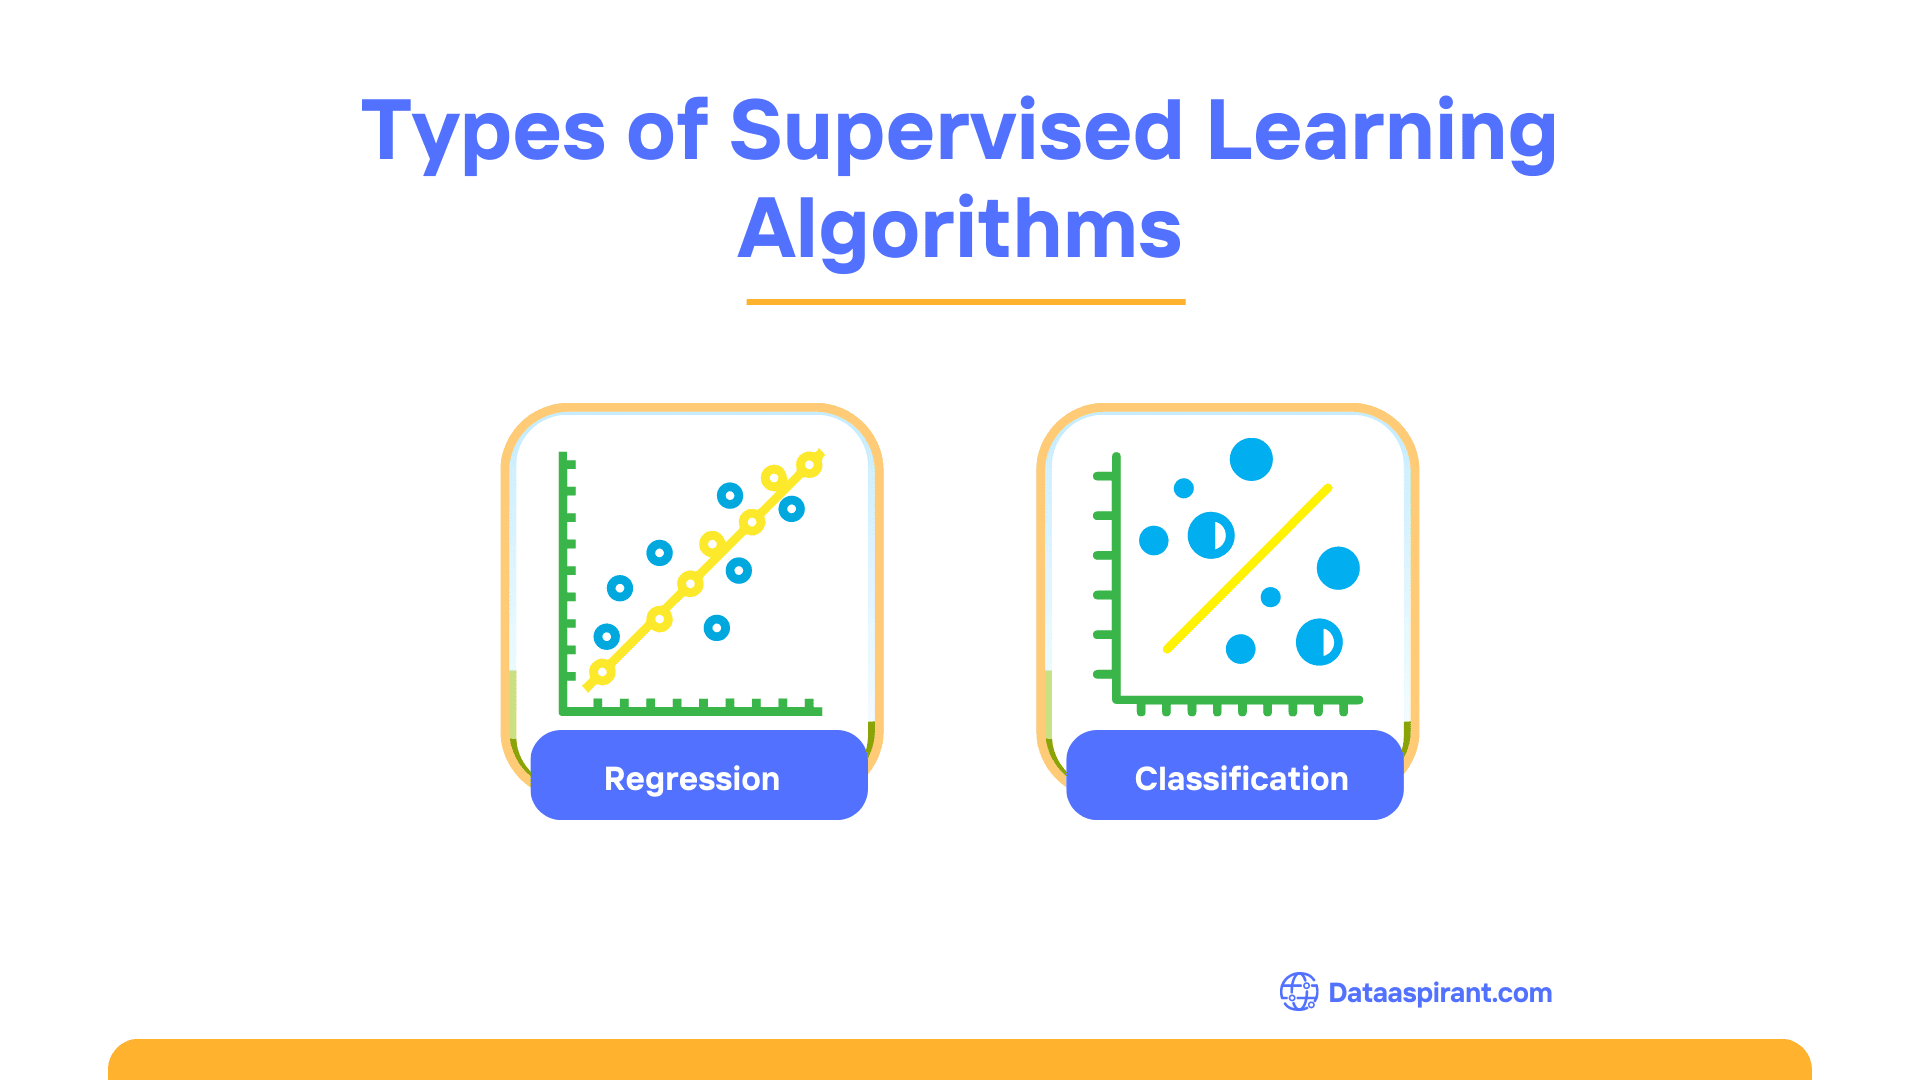 Different Types of Supervised Learning Algorithms